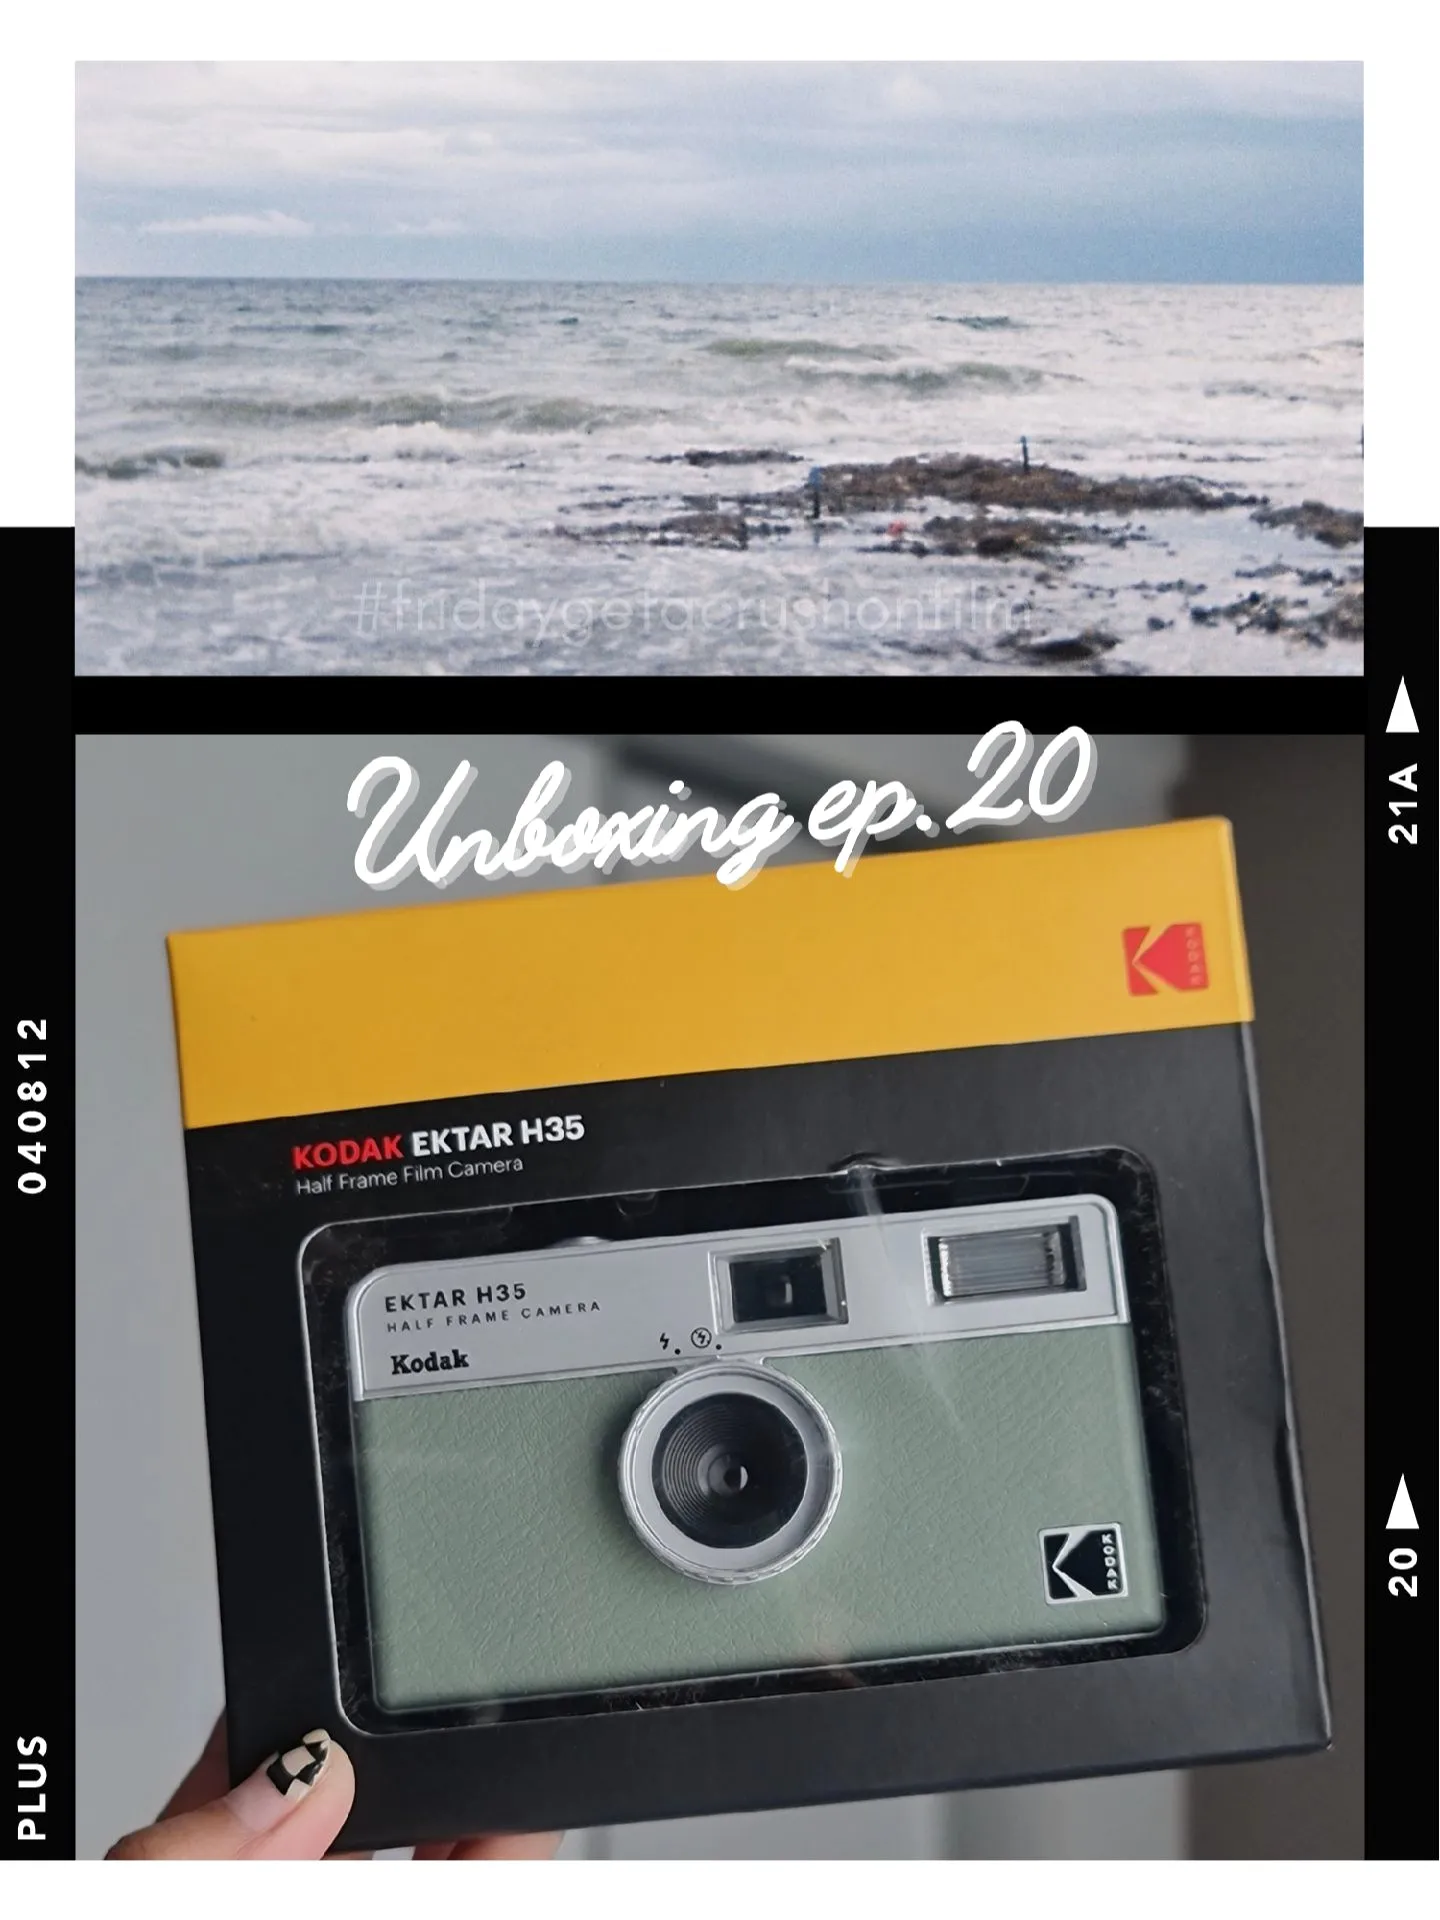 Unboxing 📦 ep.20 full review KODAK EKTAR H35 ✨📸, Video published by  girlfromvenus